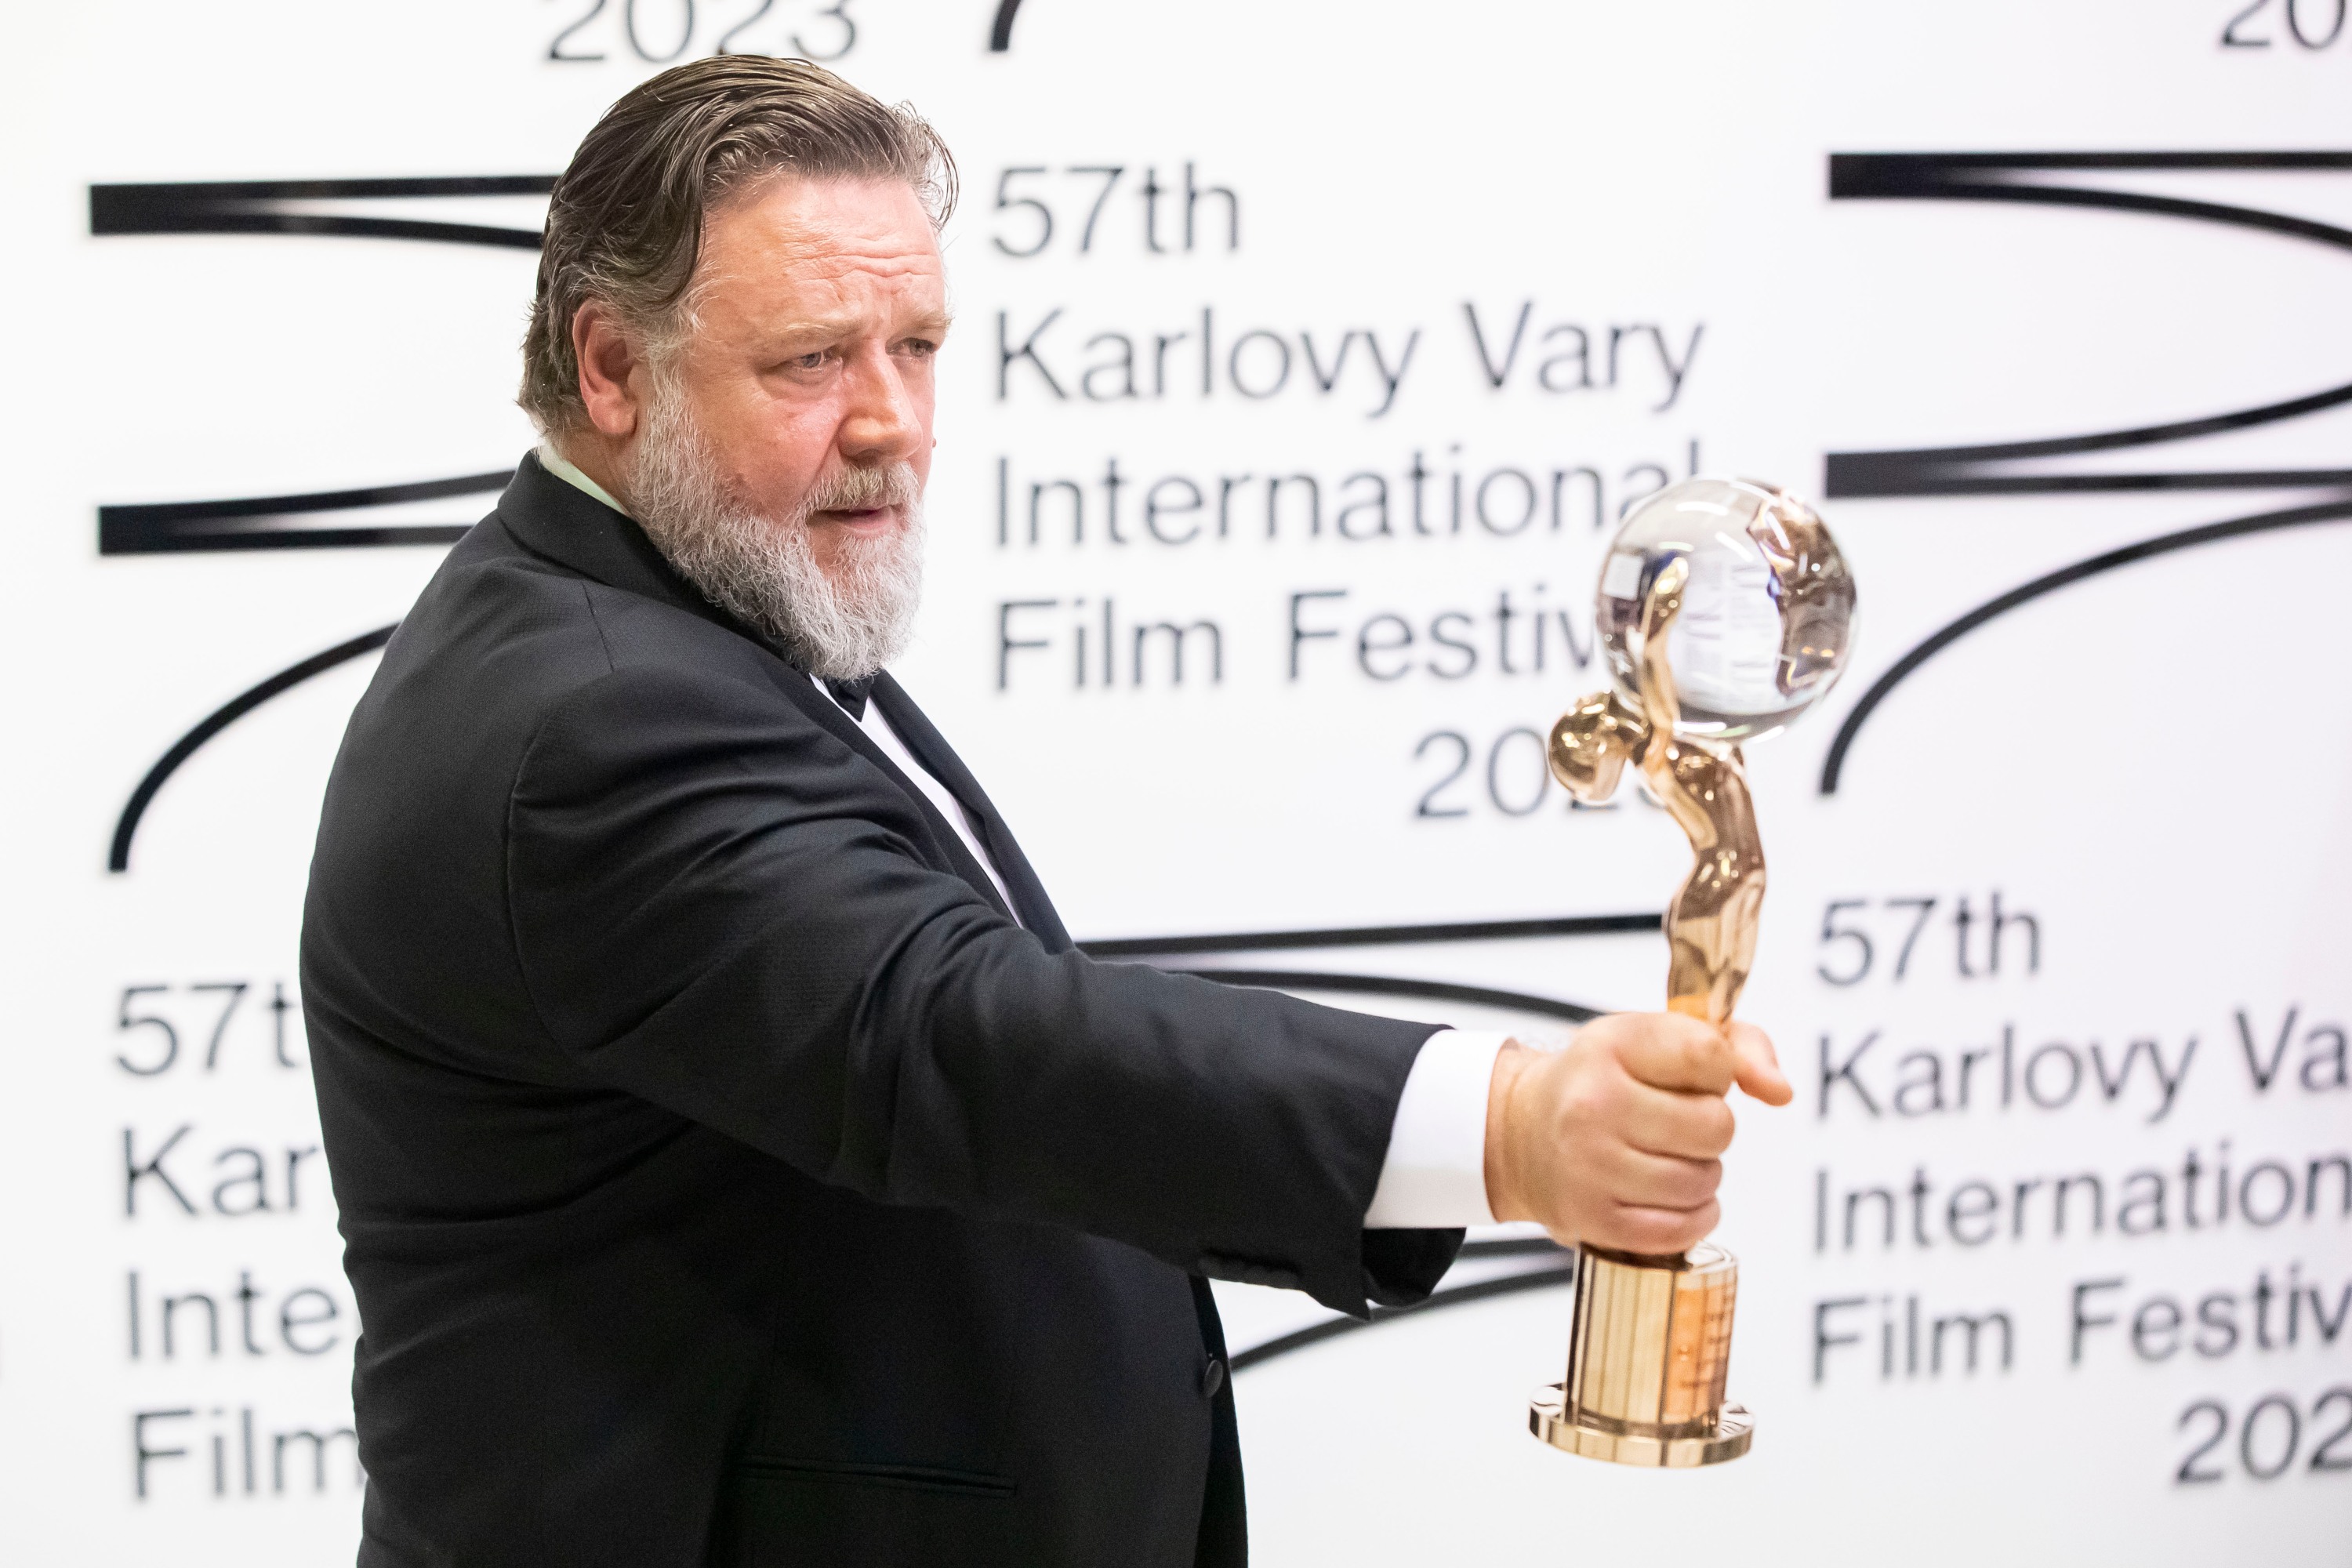 Actor Russell Crowe raises his Crystal Globe Award on a red carpet during the 57th Karlovy Vary International Film Festival in the Czech Republic.